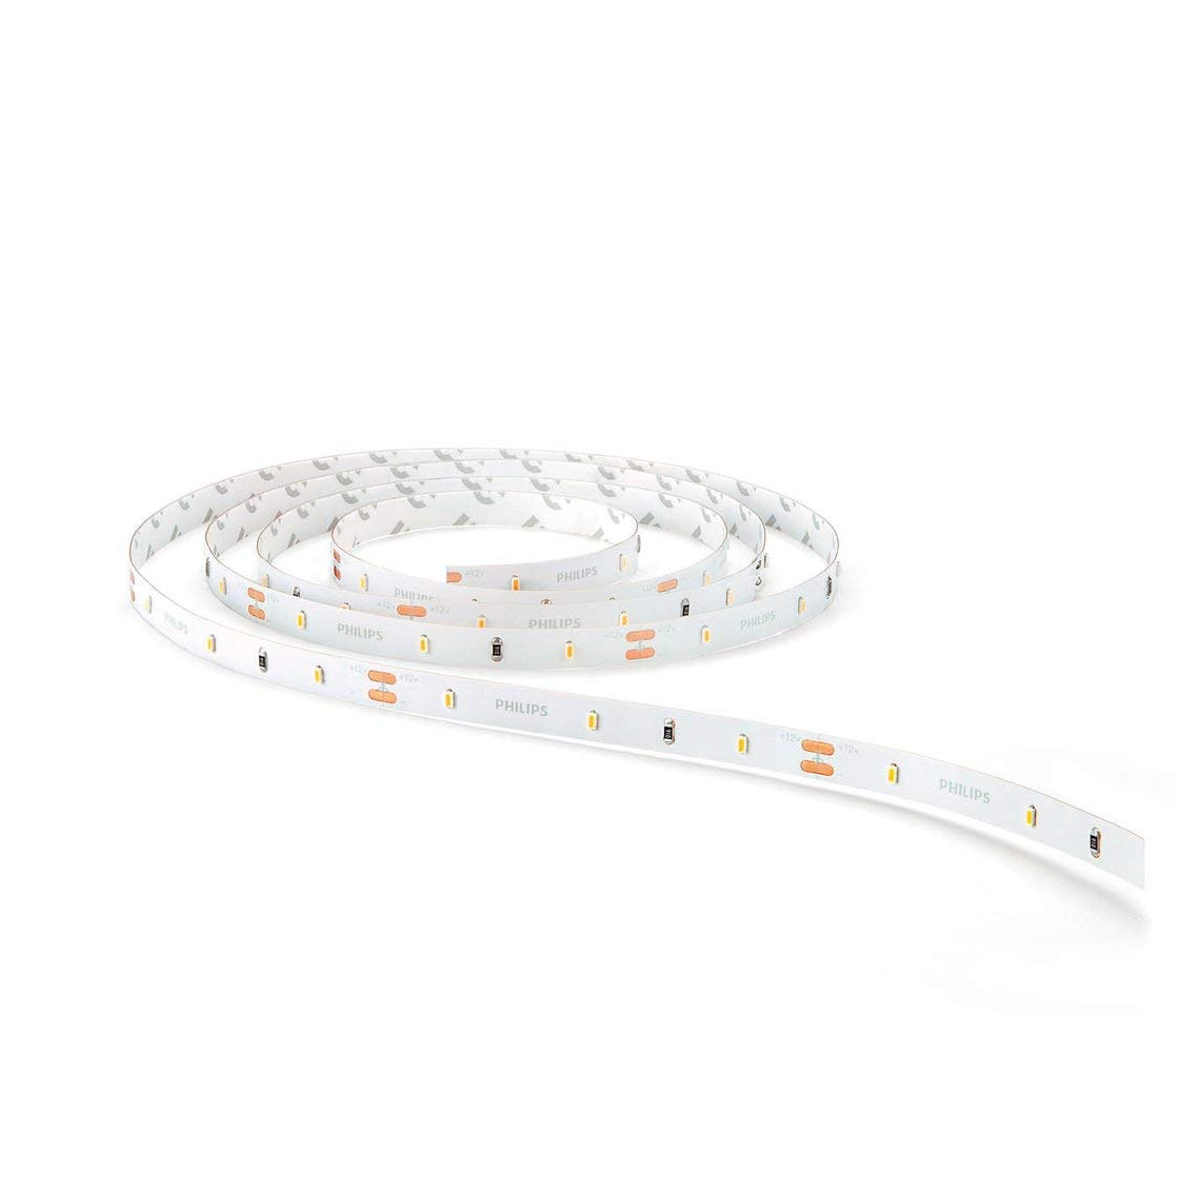 Philips CoveGlow 25W Strip light (60 LEDs, without Driver)